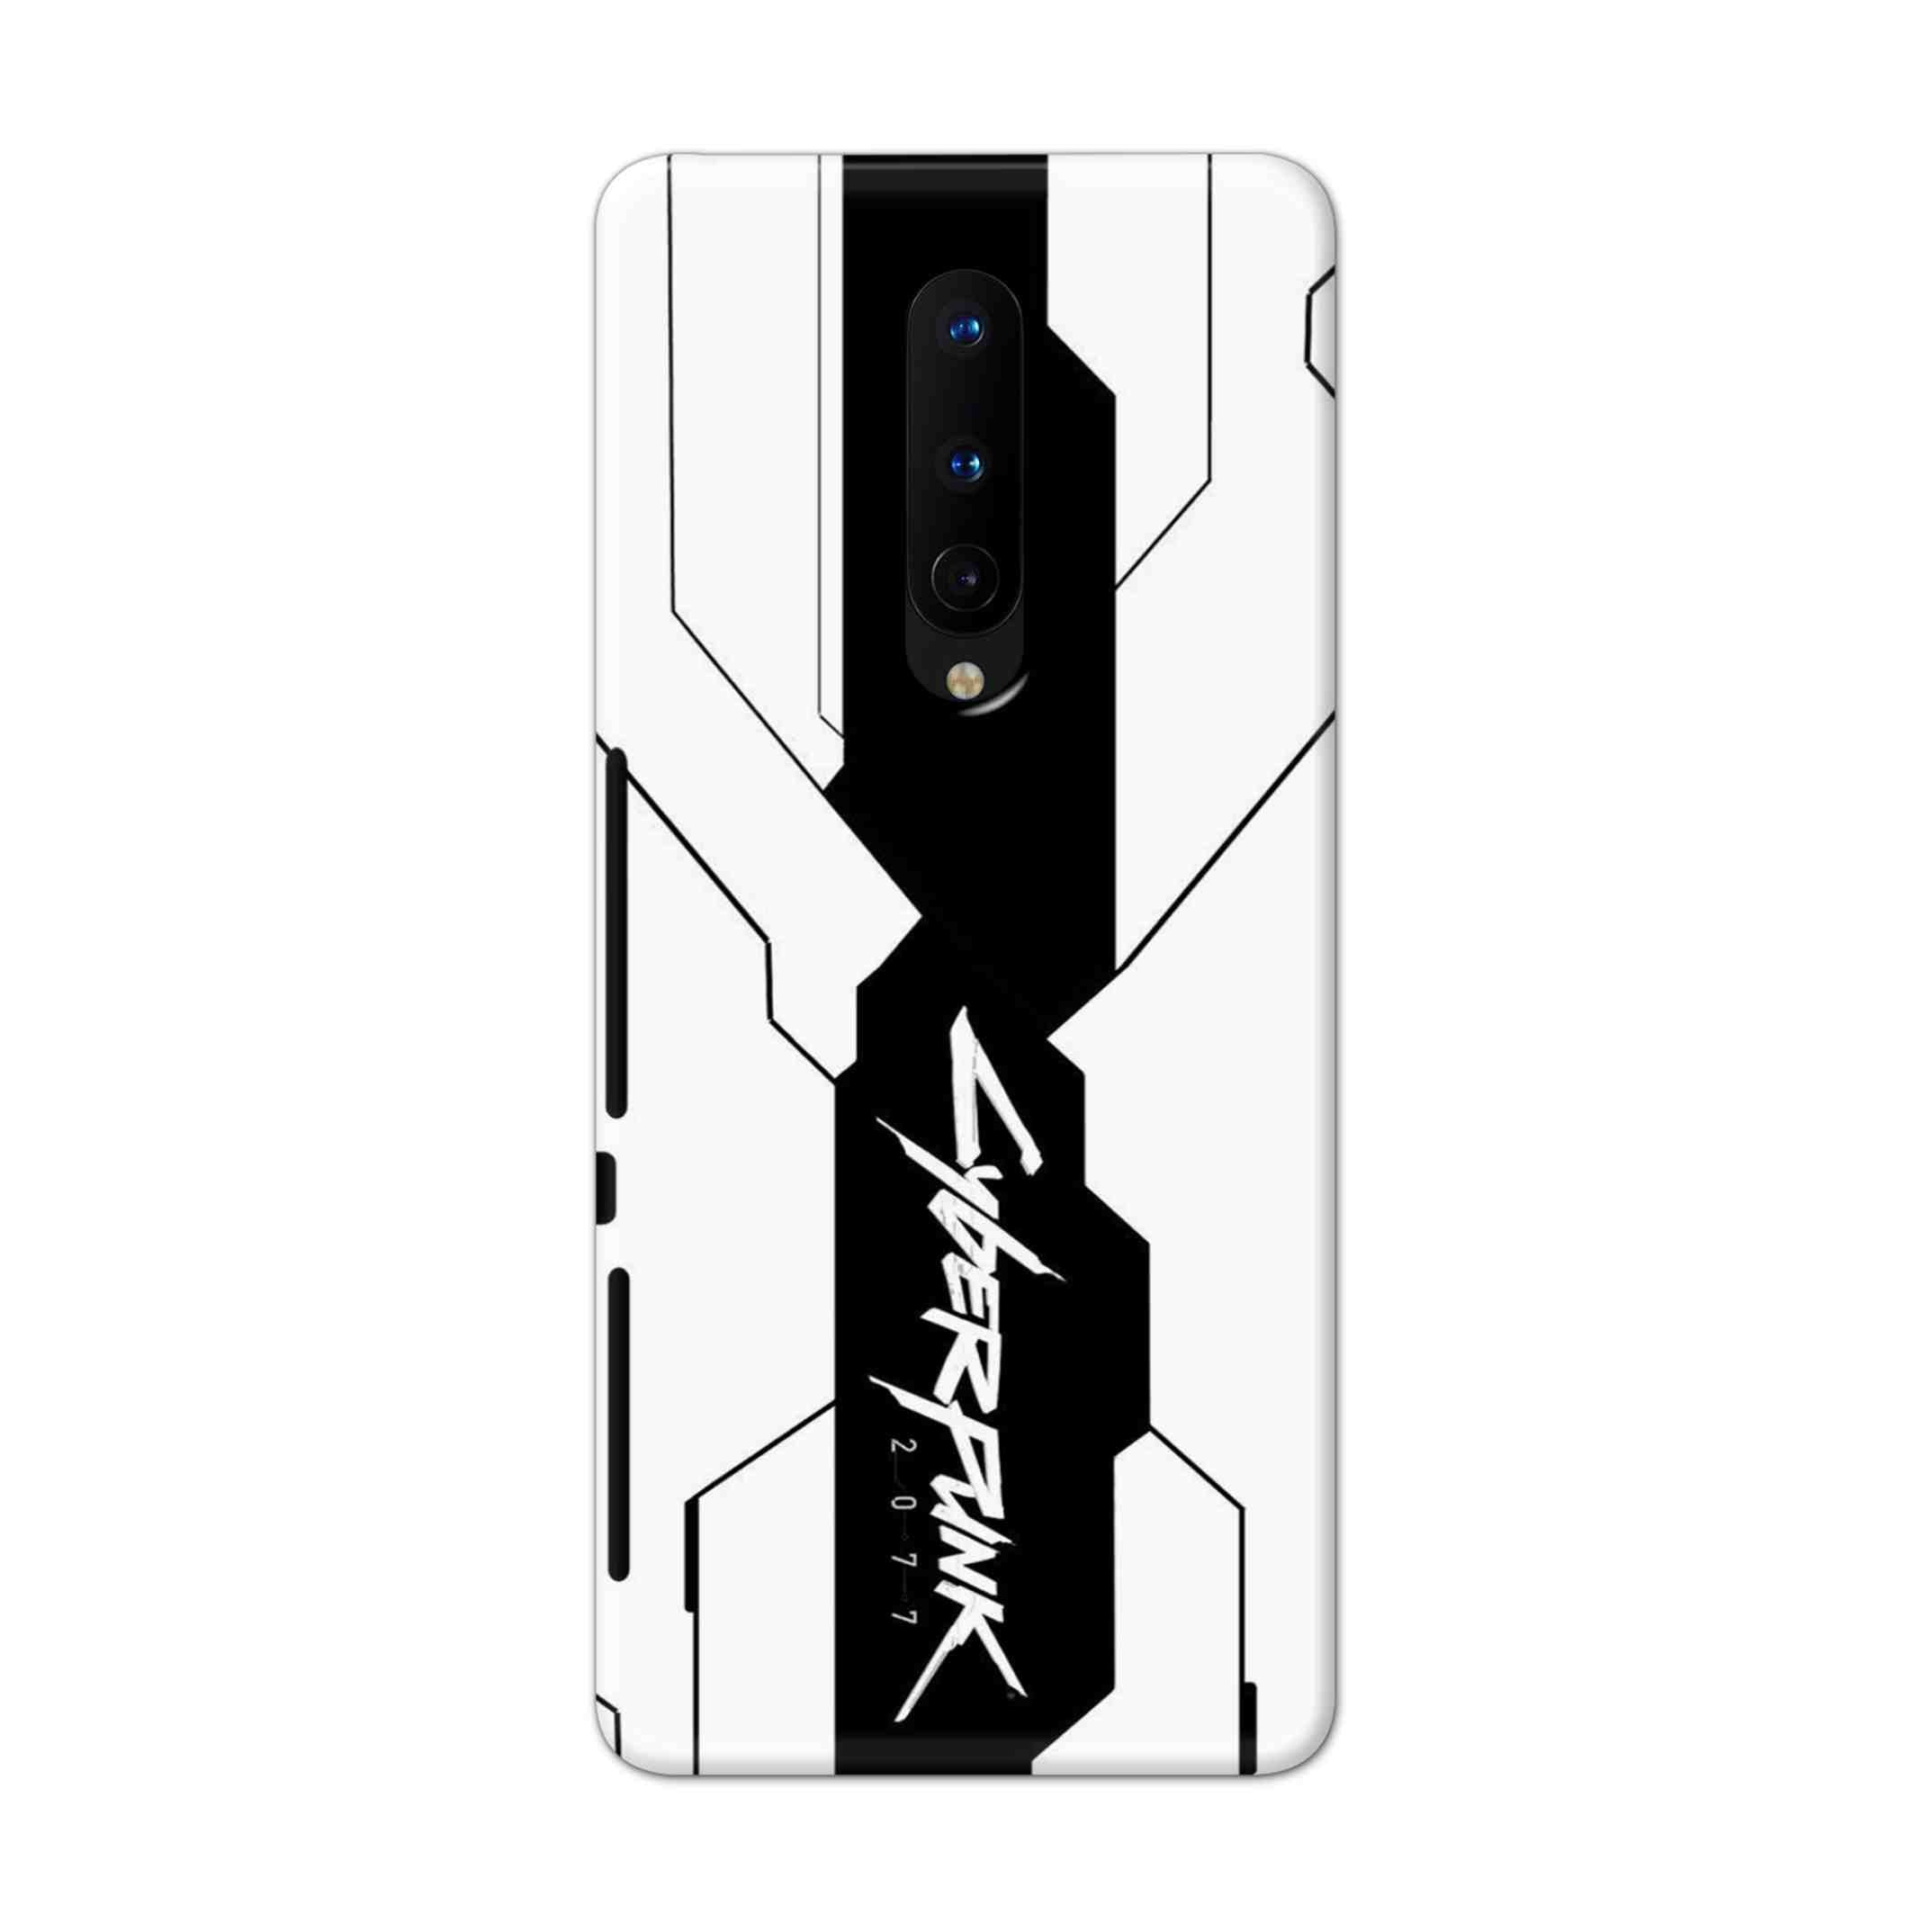 Buy Cyberpunk 2077 Hard Back Mobile Phone Case Cover For OnePlus 8 Online